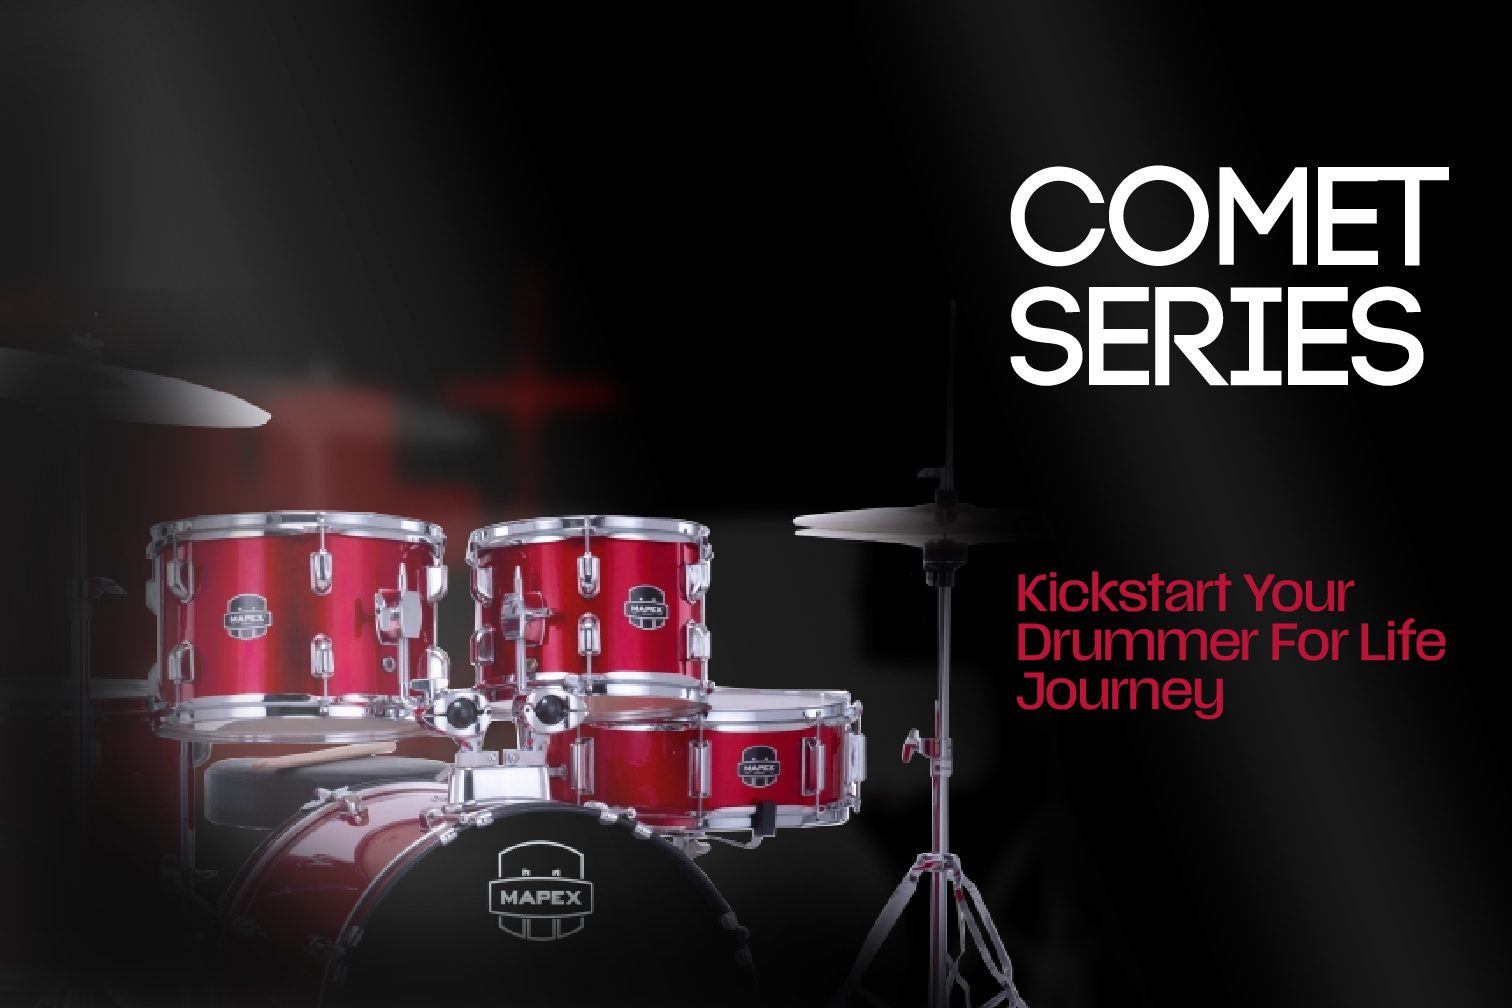 Introducing the new Comet Series from Mapex